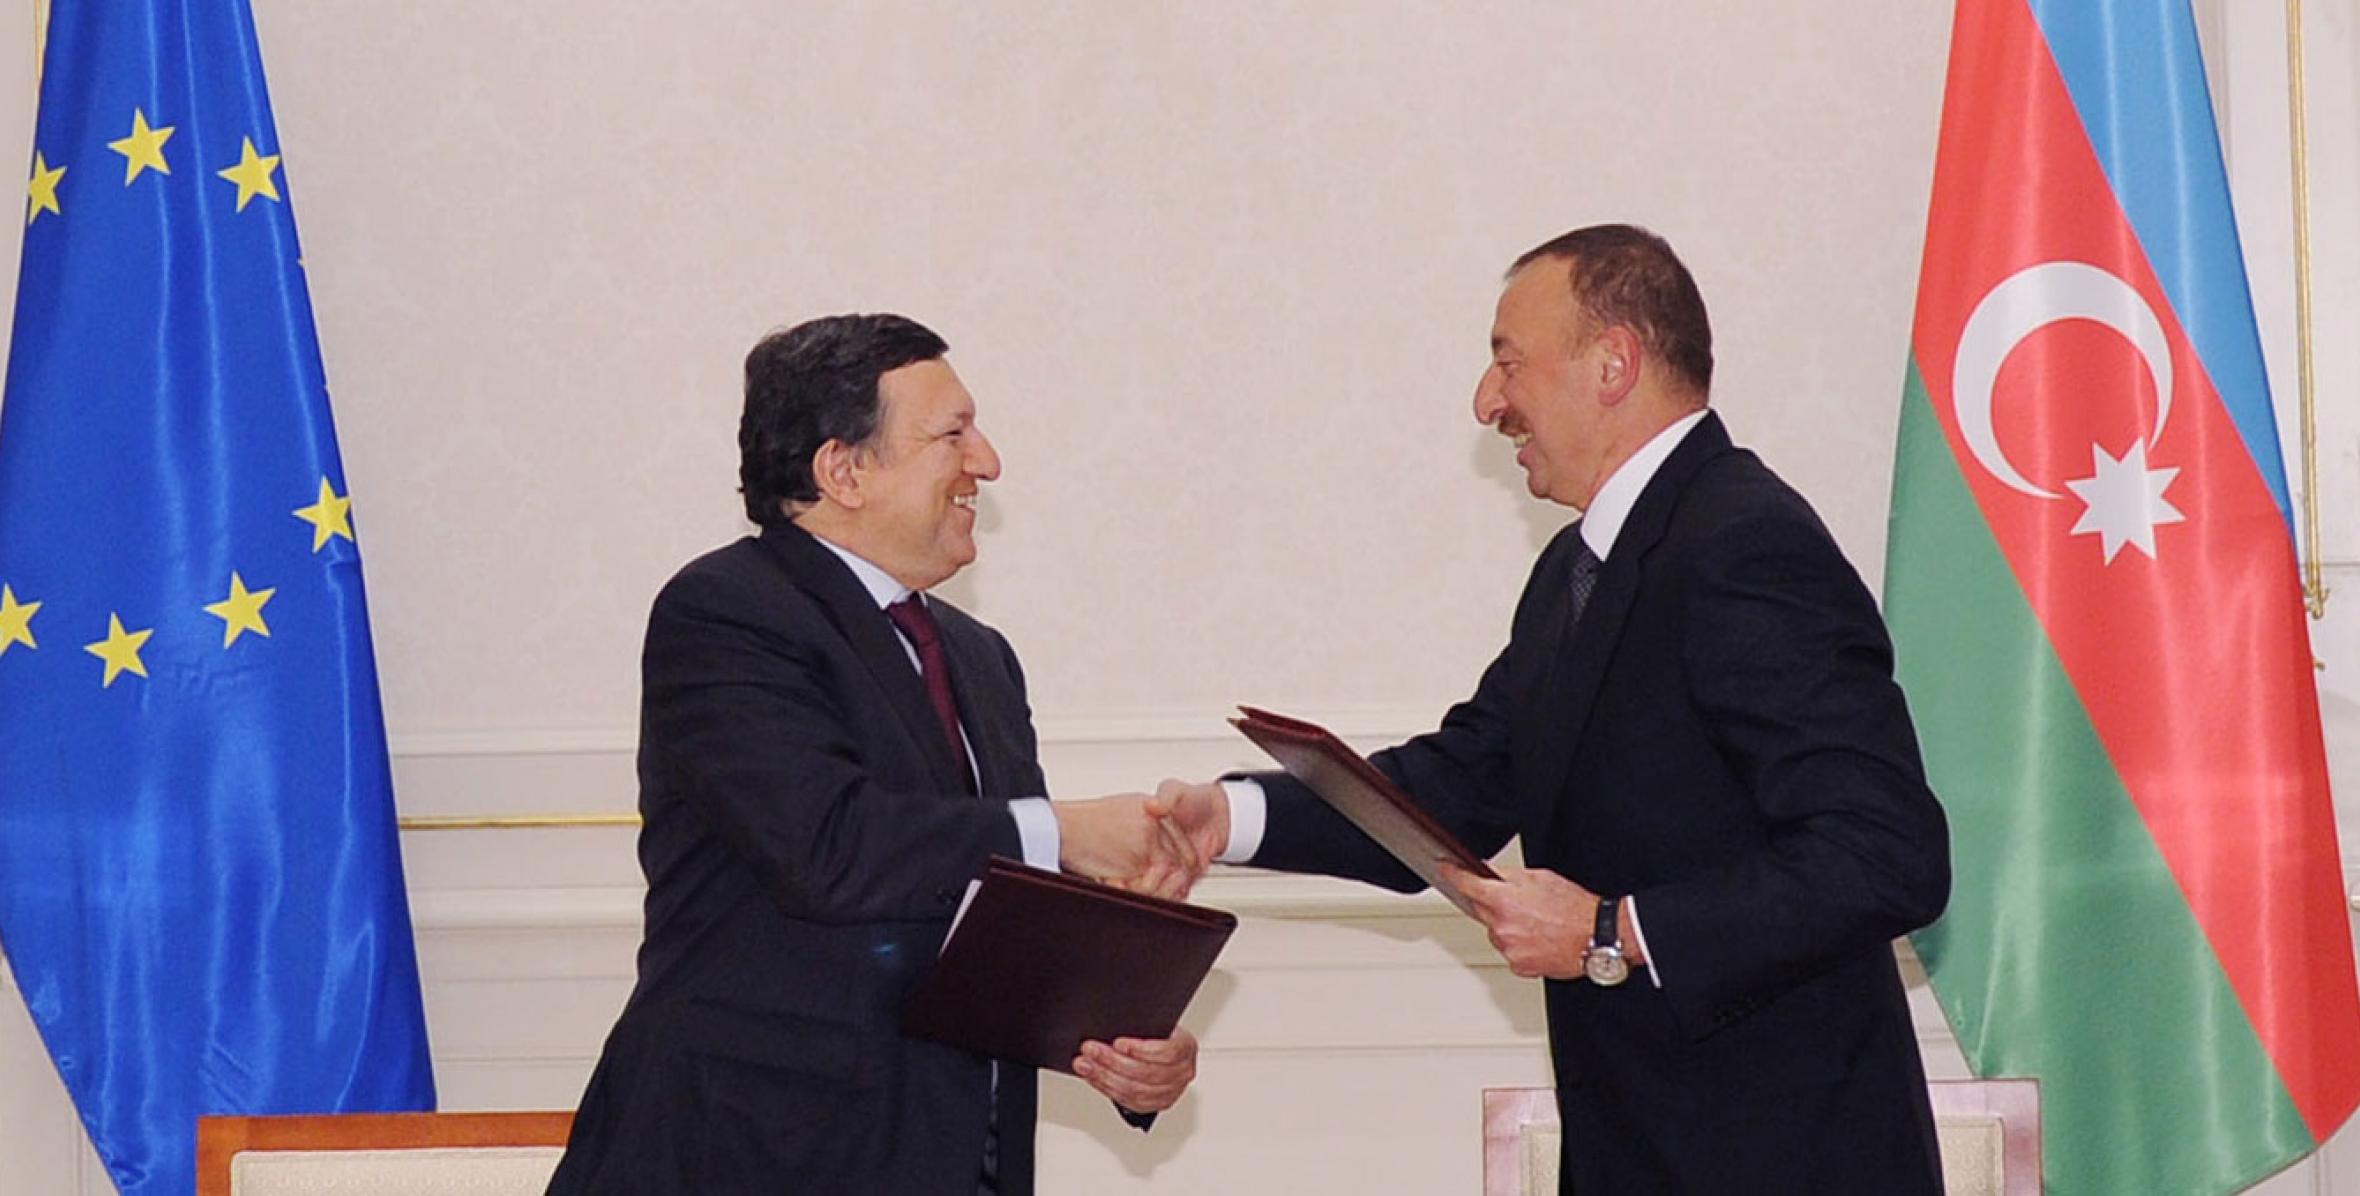 Document Signing Ceremony between Azerbaijan and the European Union took place